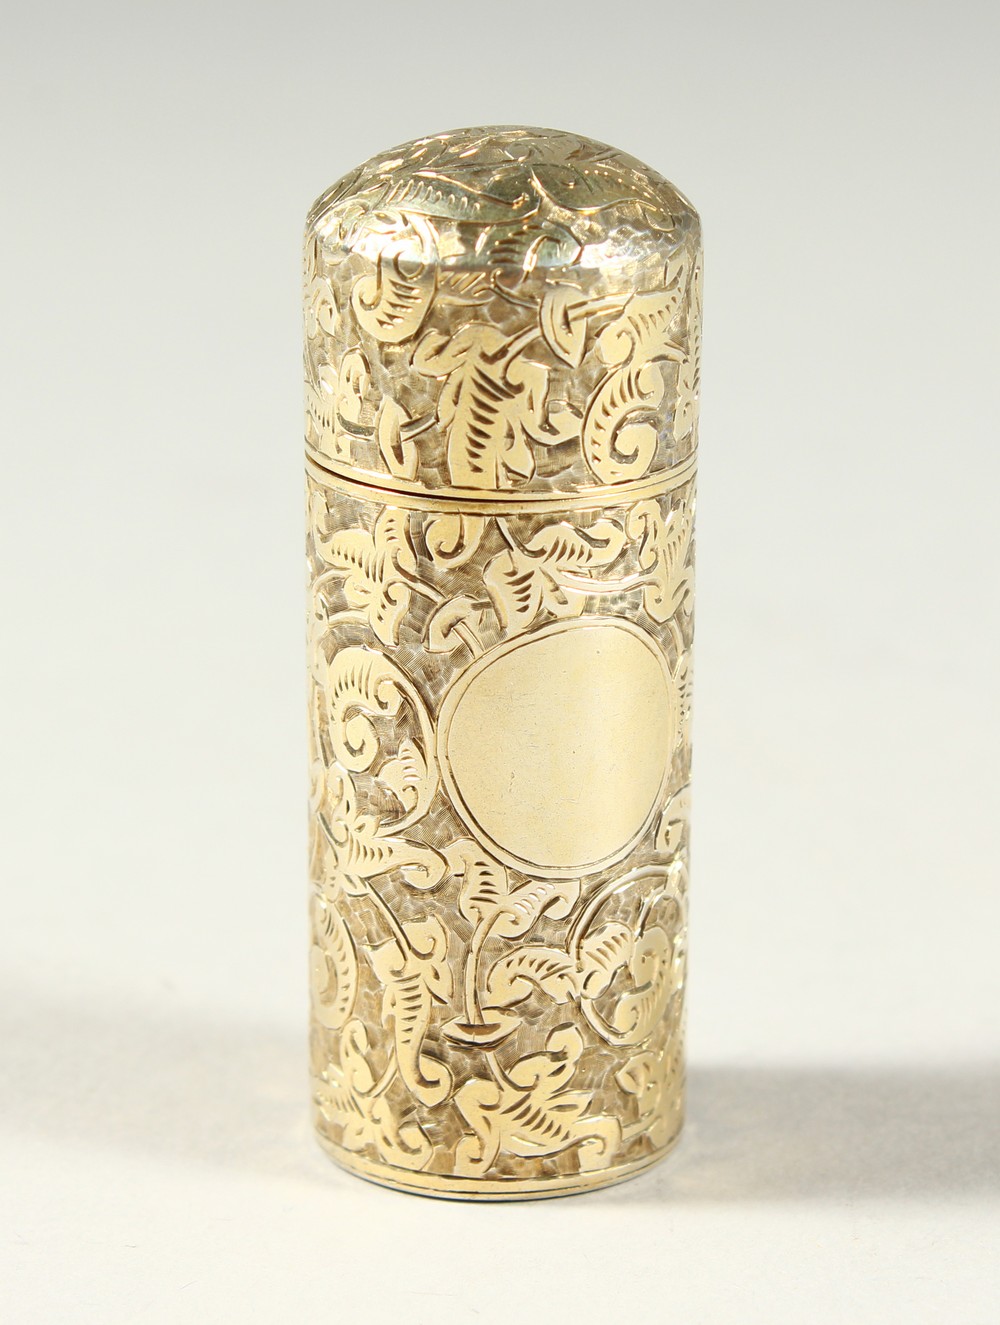 A GOOD VICTORIAN SILVER GILT ENGRAVED DAUM SHAPED SCENT BOTTLE with glass stopper. Chester 1888. 5.